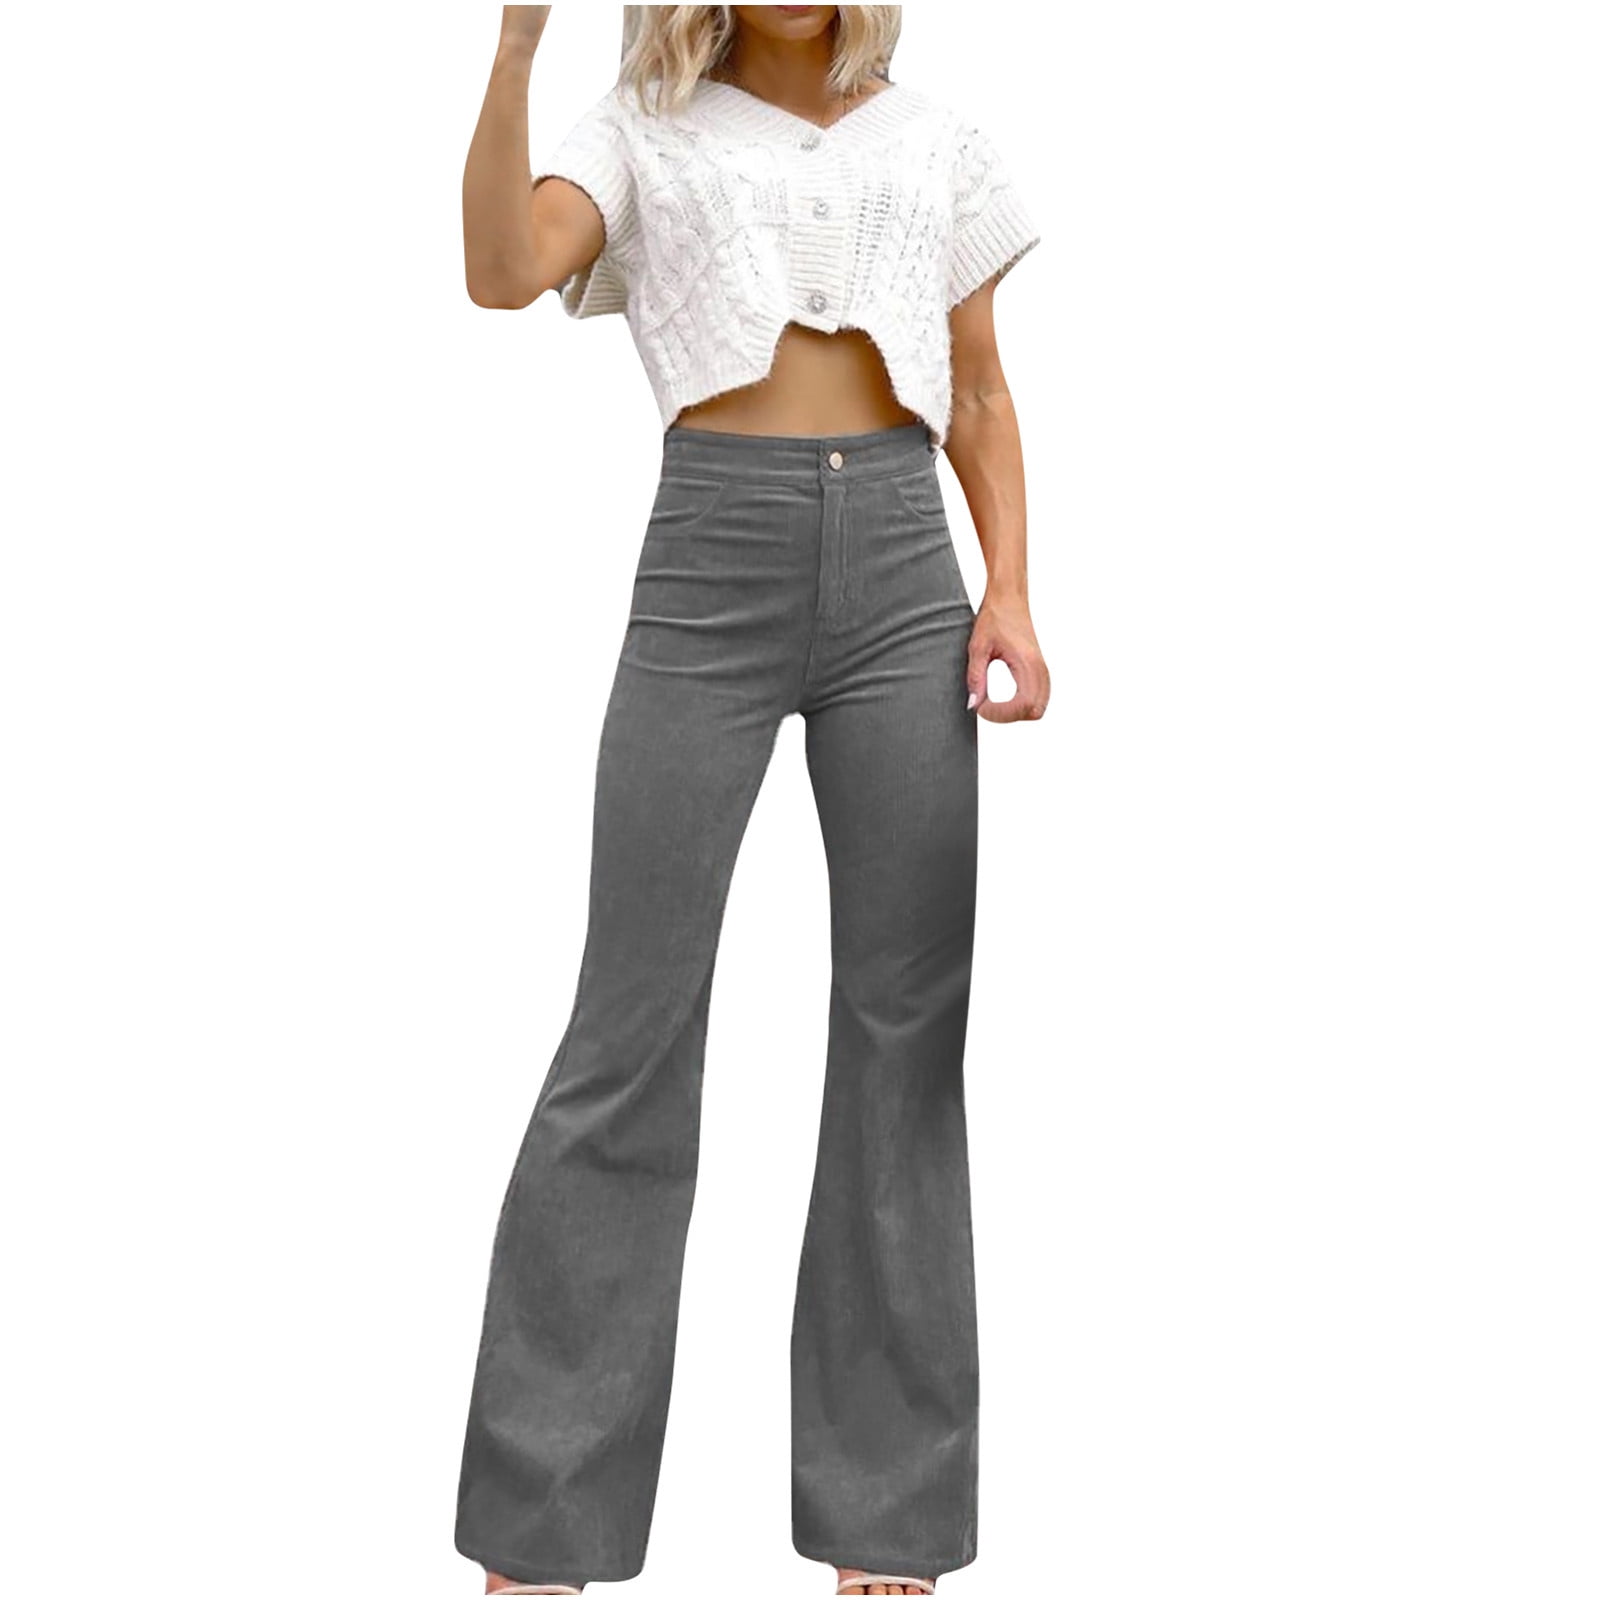 XFLWAM Women's High Waist Flare Pants Casual Wide Leg Bell Bottom Leggings  Solid Color Plus Size Long Trousers with Pockets Gray M 